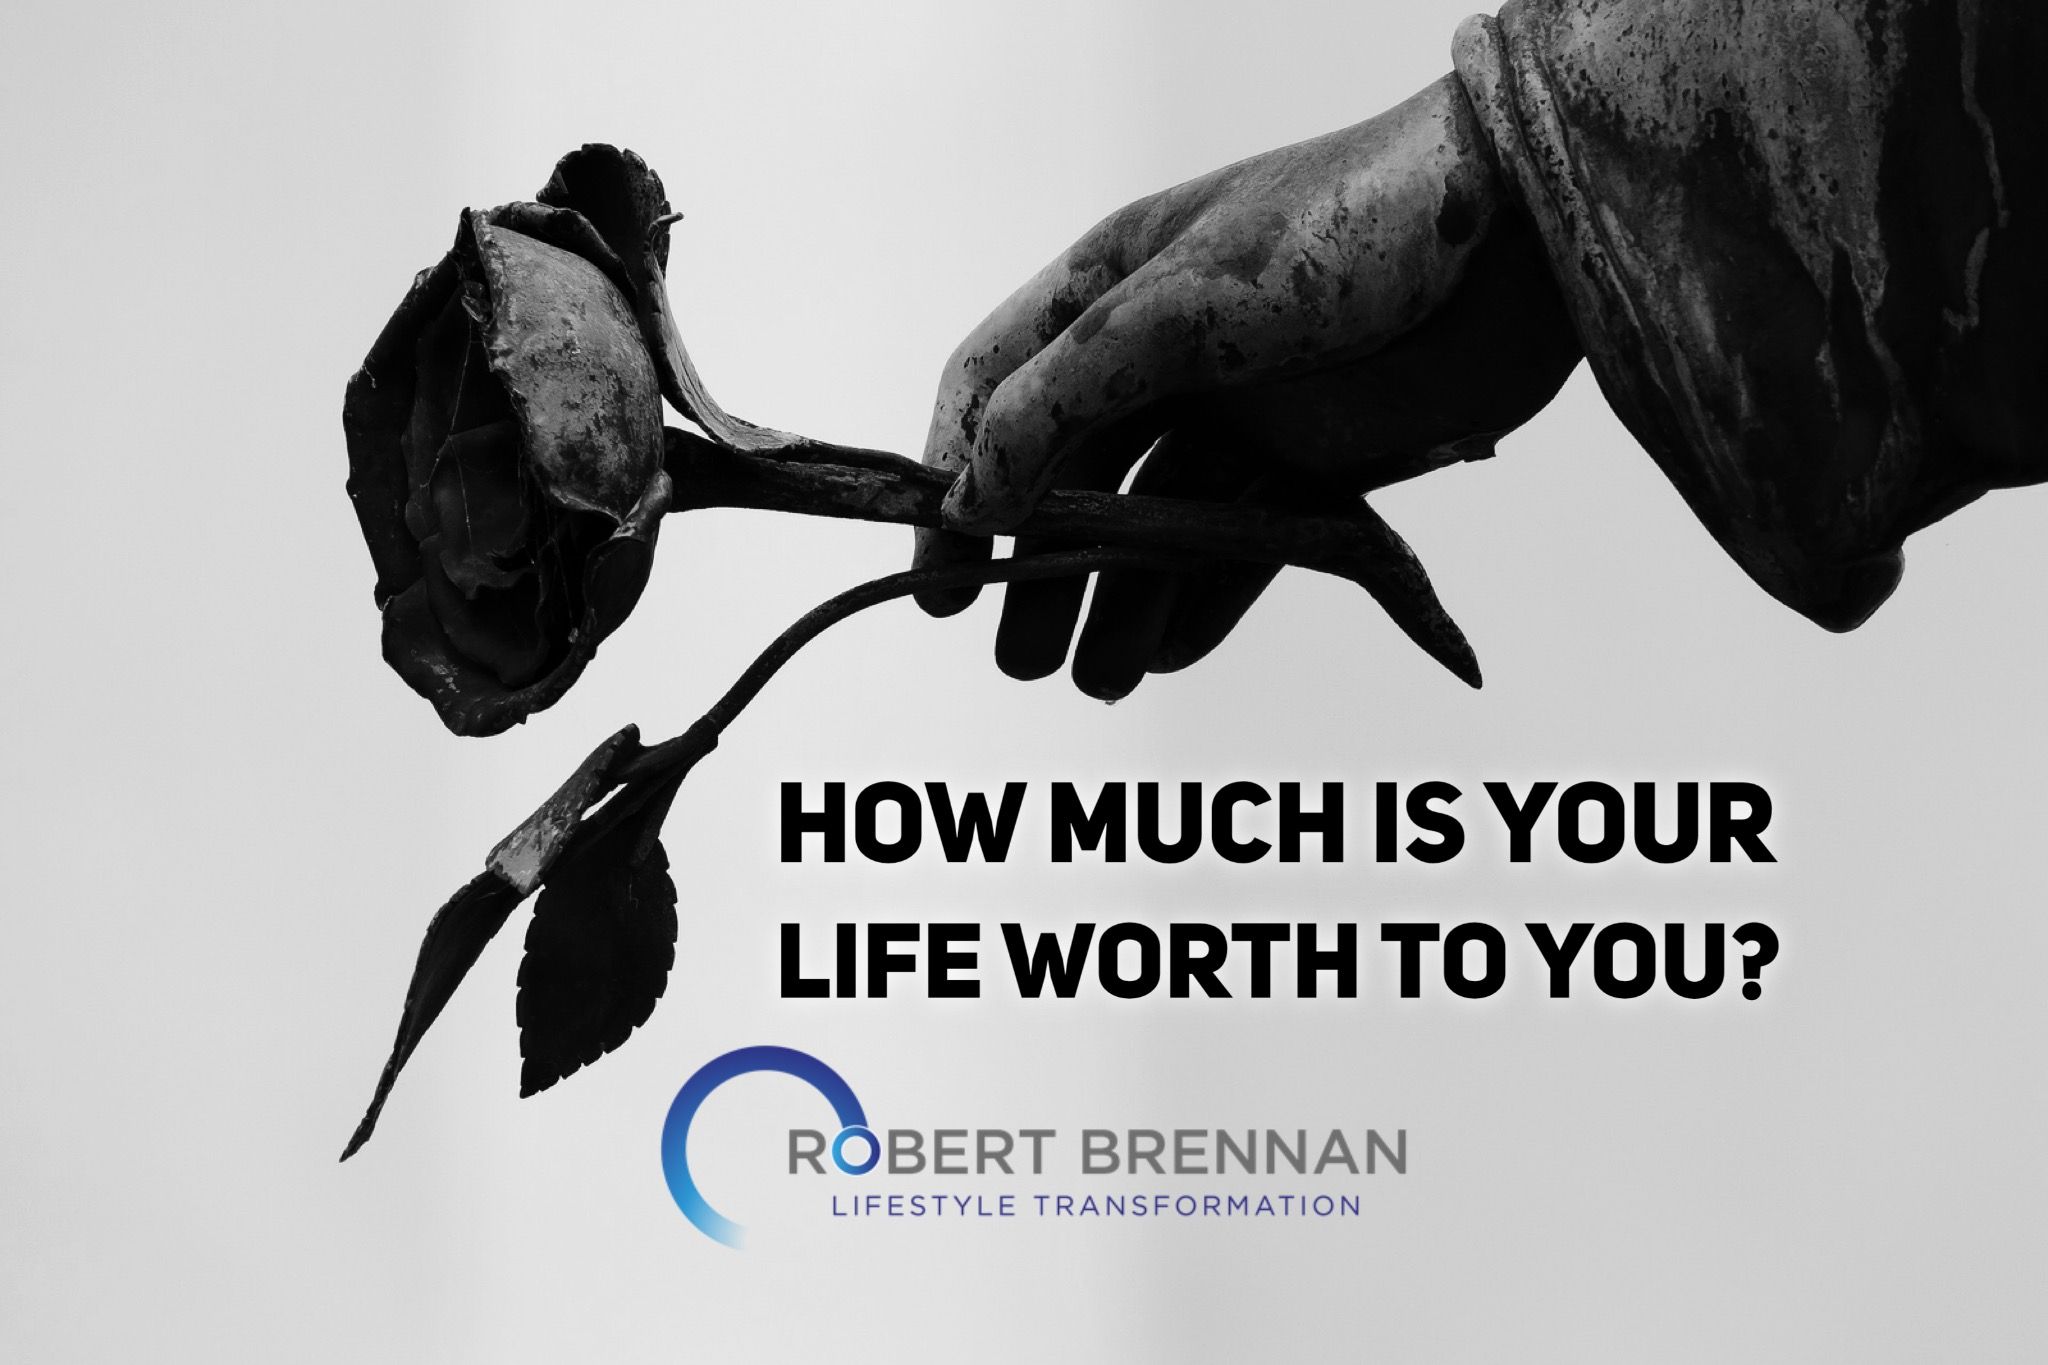 How much is your life worth pic.jpg